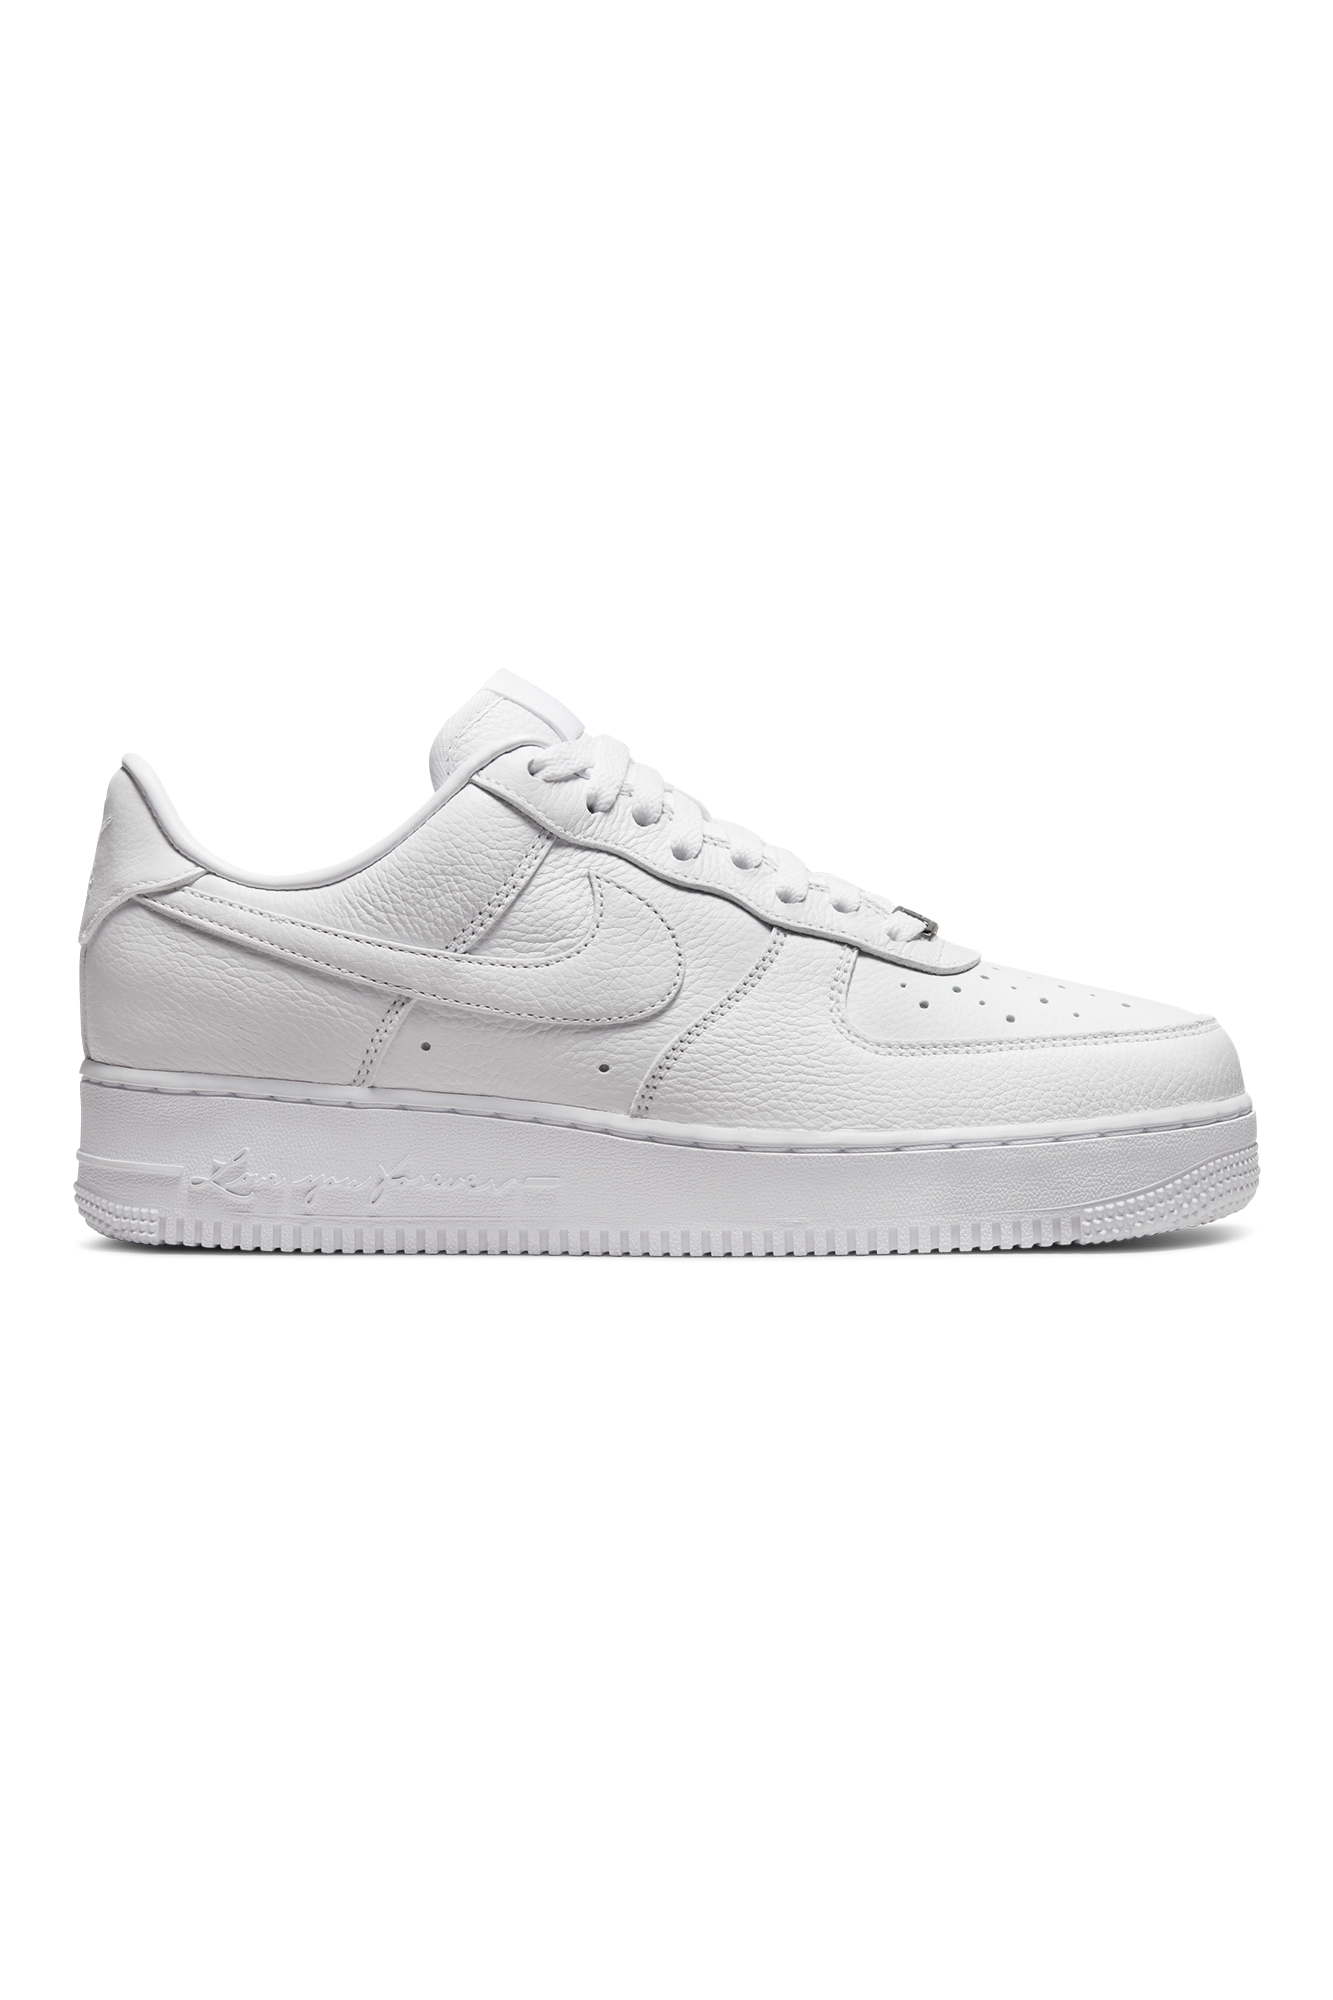 Air Force 1 Low x Nocta "Certified Lover Boy"